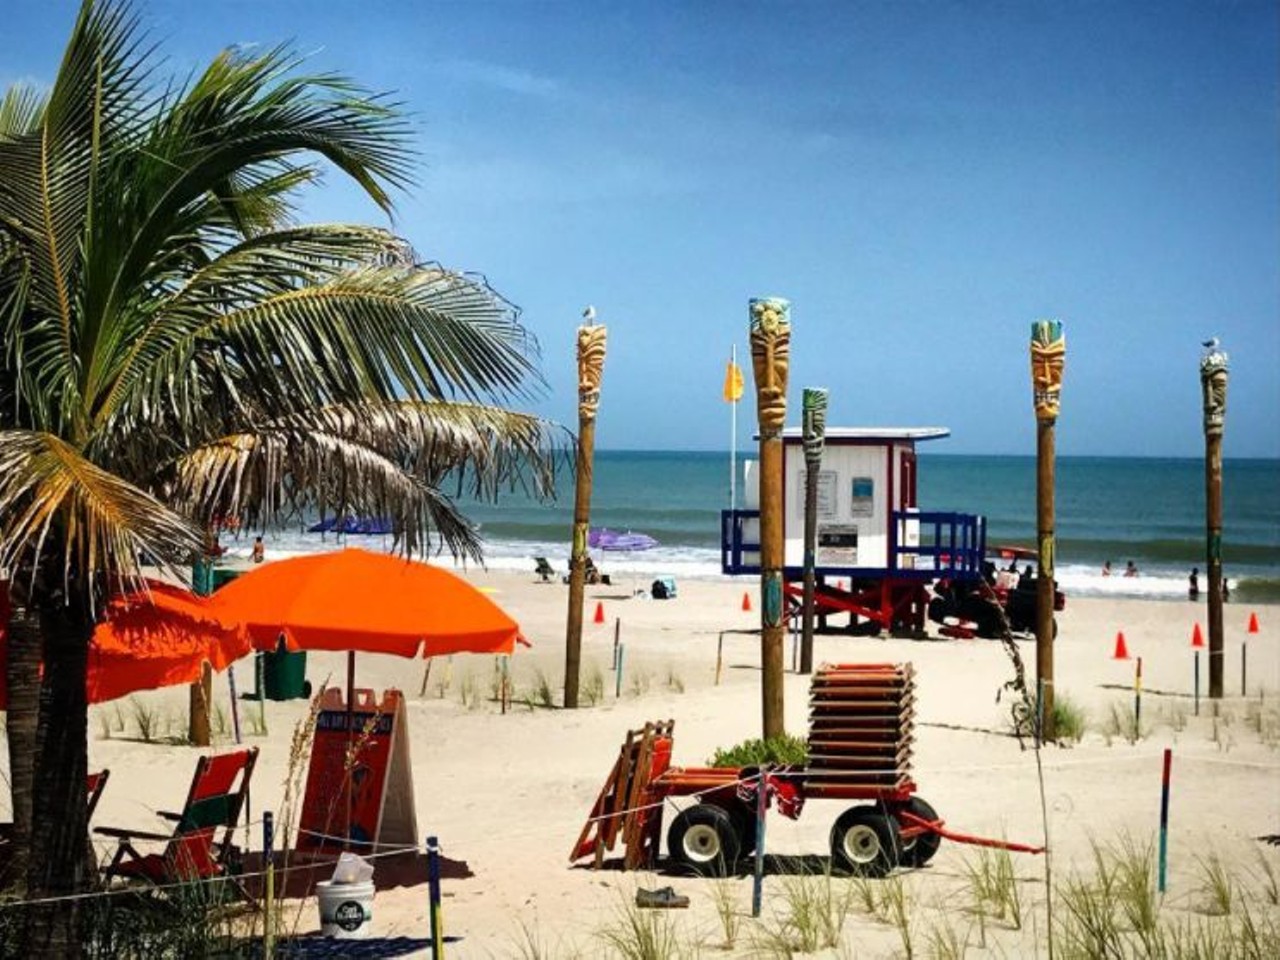 Cocoa Beach
Estimated driving distance: 1 hour
Orlando's closest beach off Florida's Space Coast is just an hour away and the stuff of surfing legend. Explore its sandy Atlantic beaches, famous pier and the world's largest surfing shop at the Cocoa Beach Ron Jon Surf Shop.
Photo via  gubbybearr/Instagram